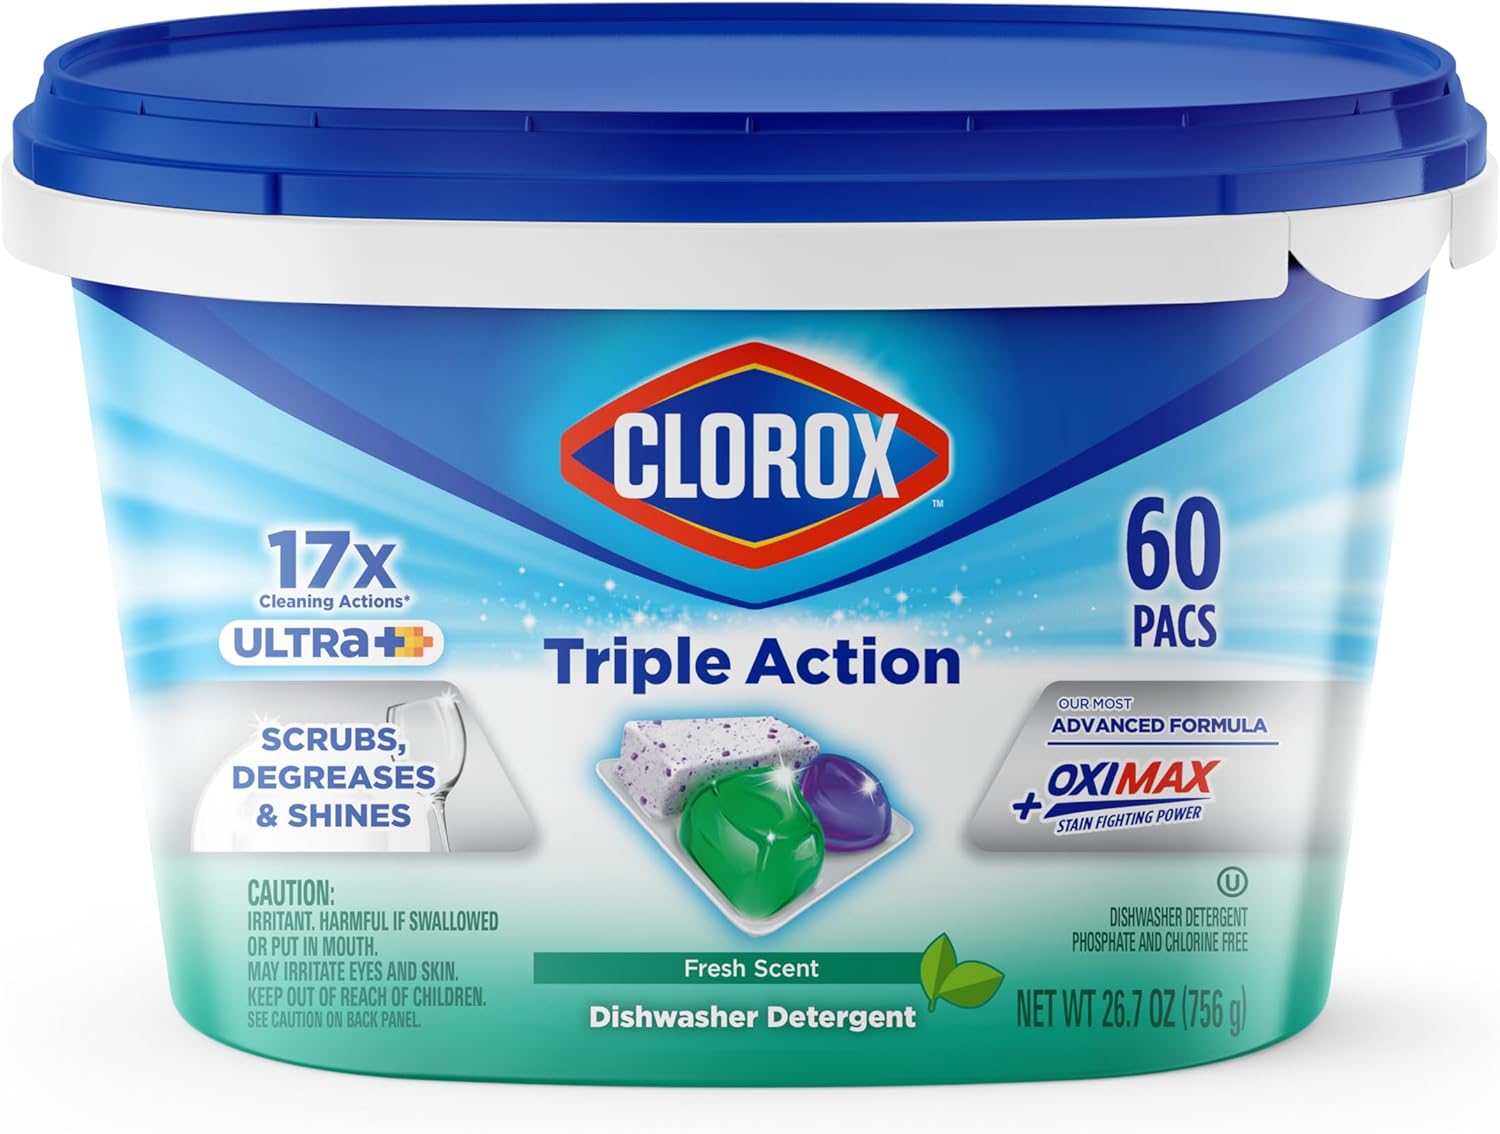 Clorox Triple Action + Ultra Dishwasher Detergent Pacs, 60 Count Dishwashing Pacs, Fresh Scent